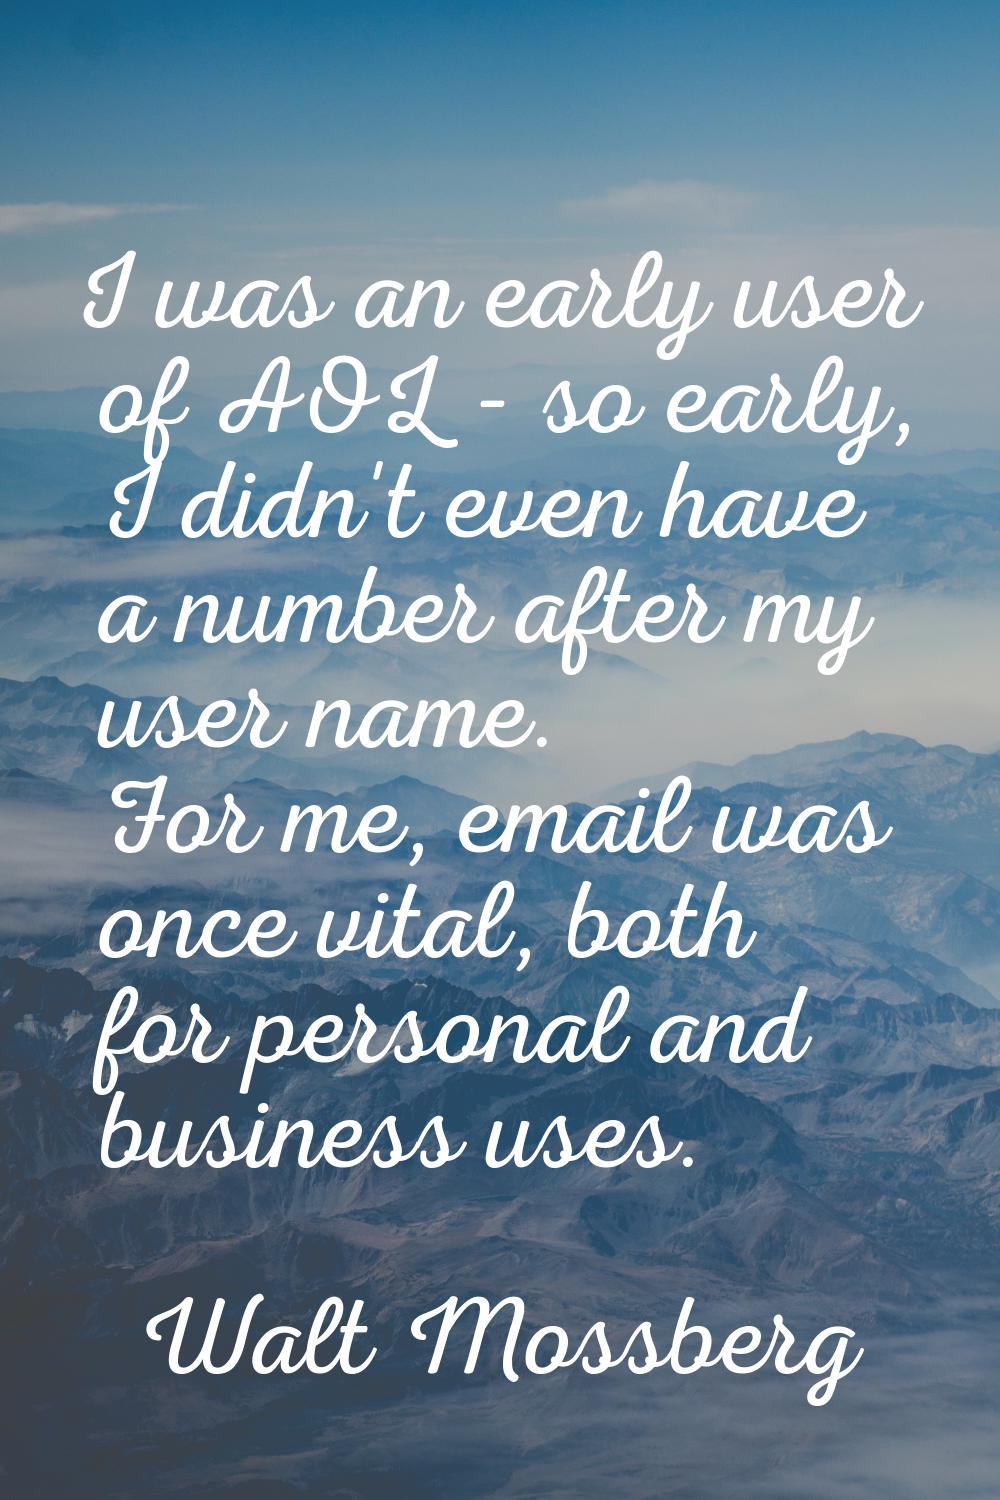 I was an early user of AOL - so early, I didn't even have a number after my user name. For me, emai